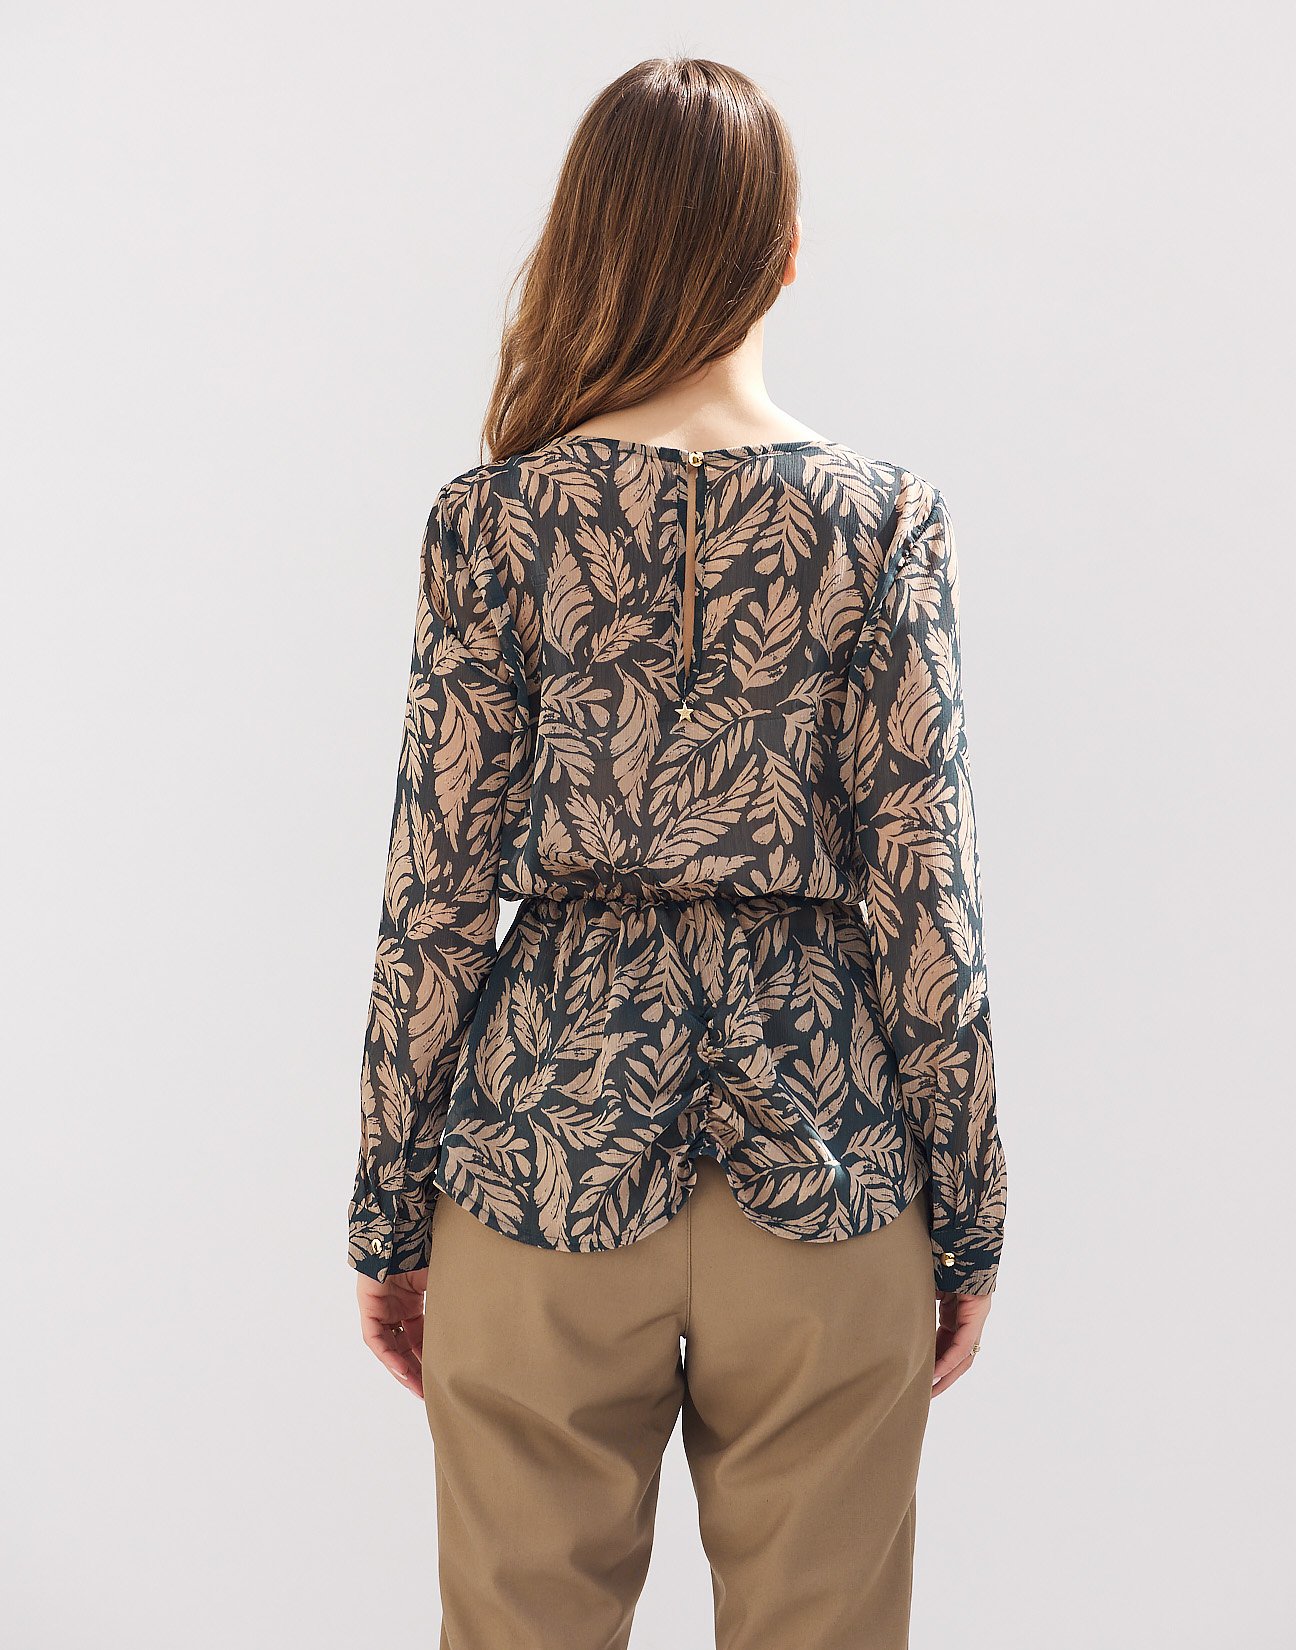 Printed top with knot